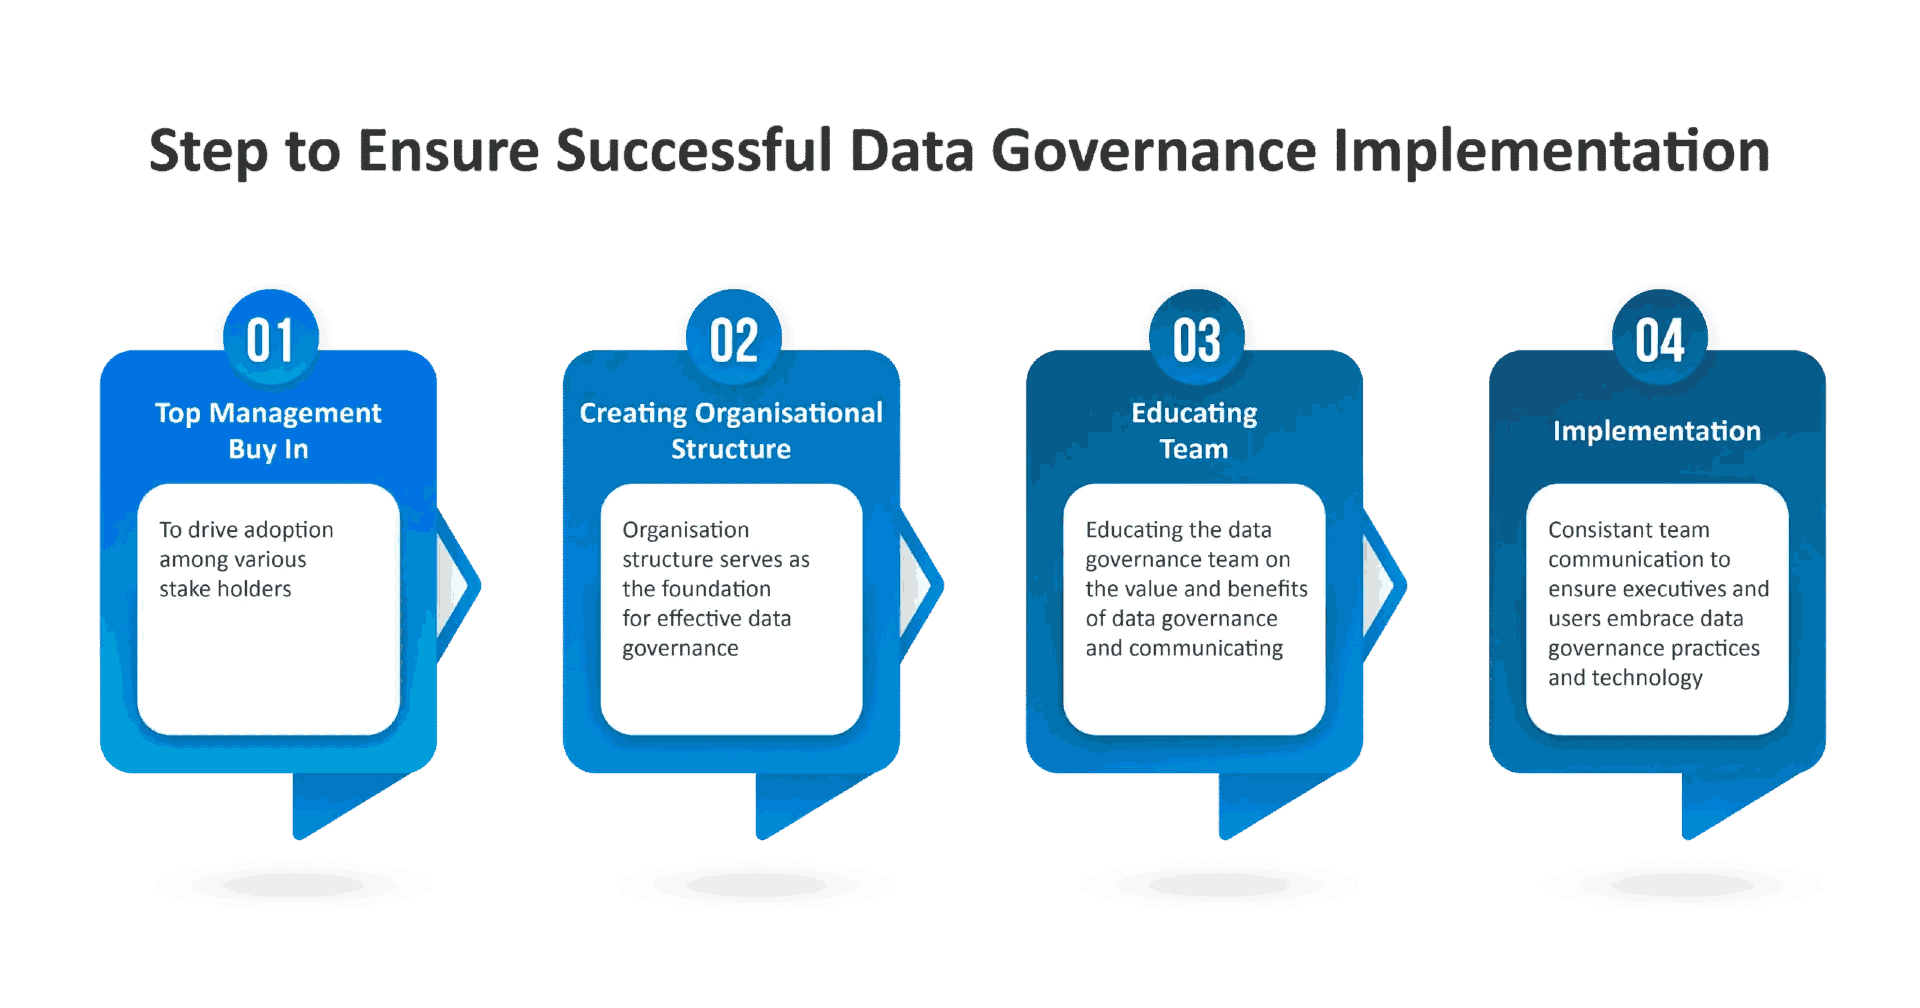 Step-to-Ensure-Successful-Data-Governance-Implementation-01-1